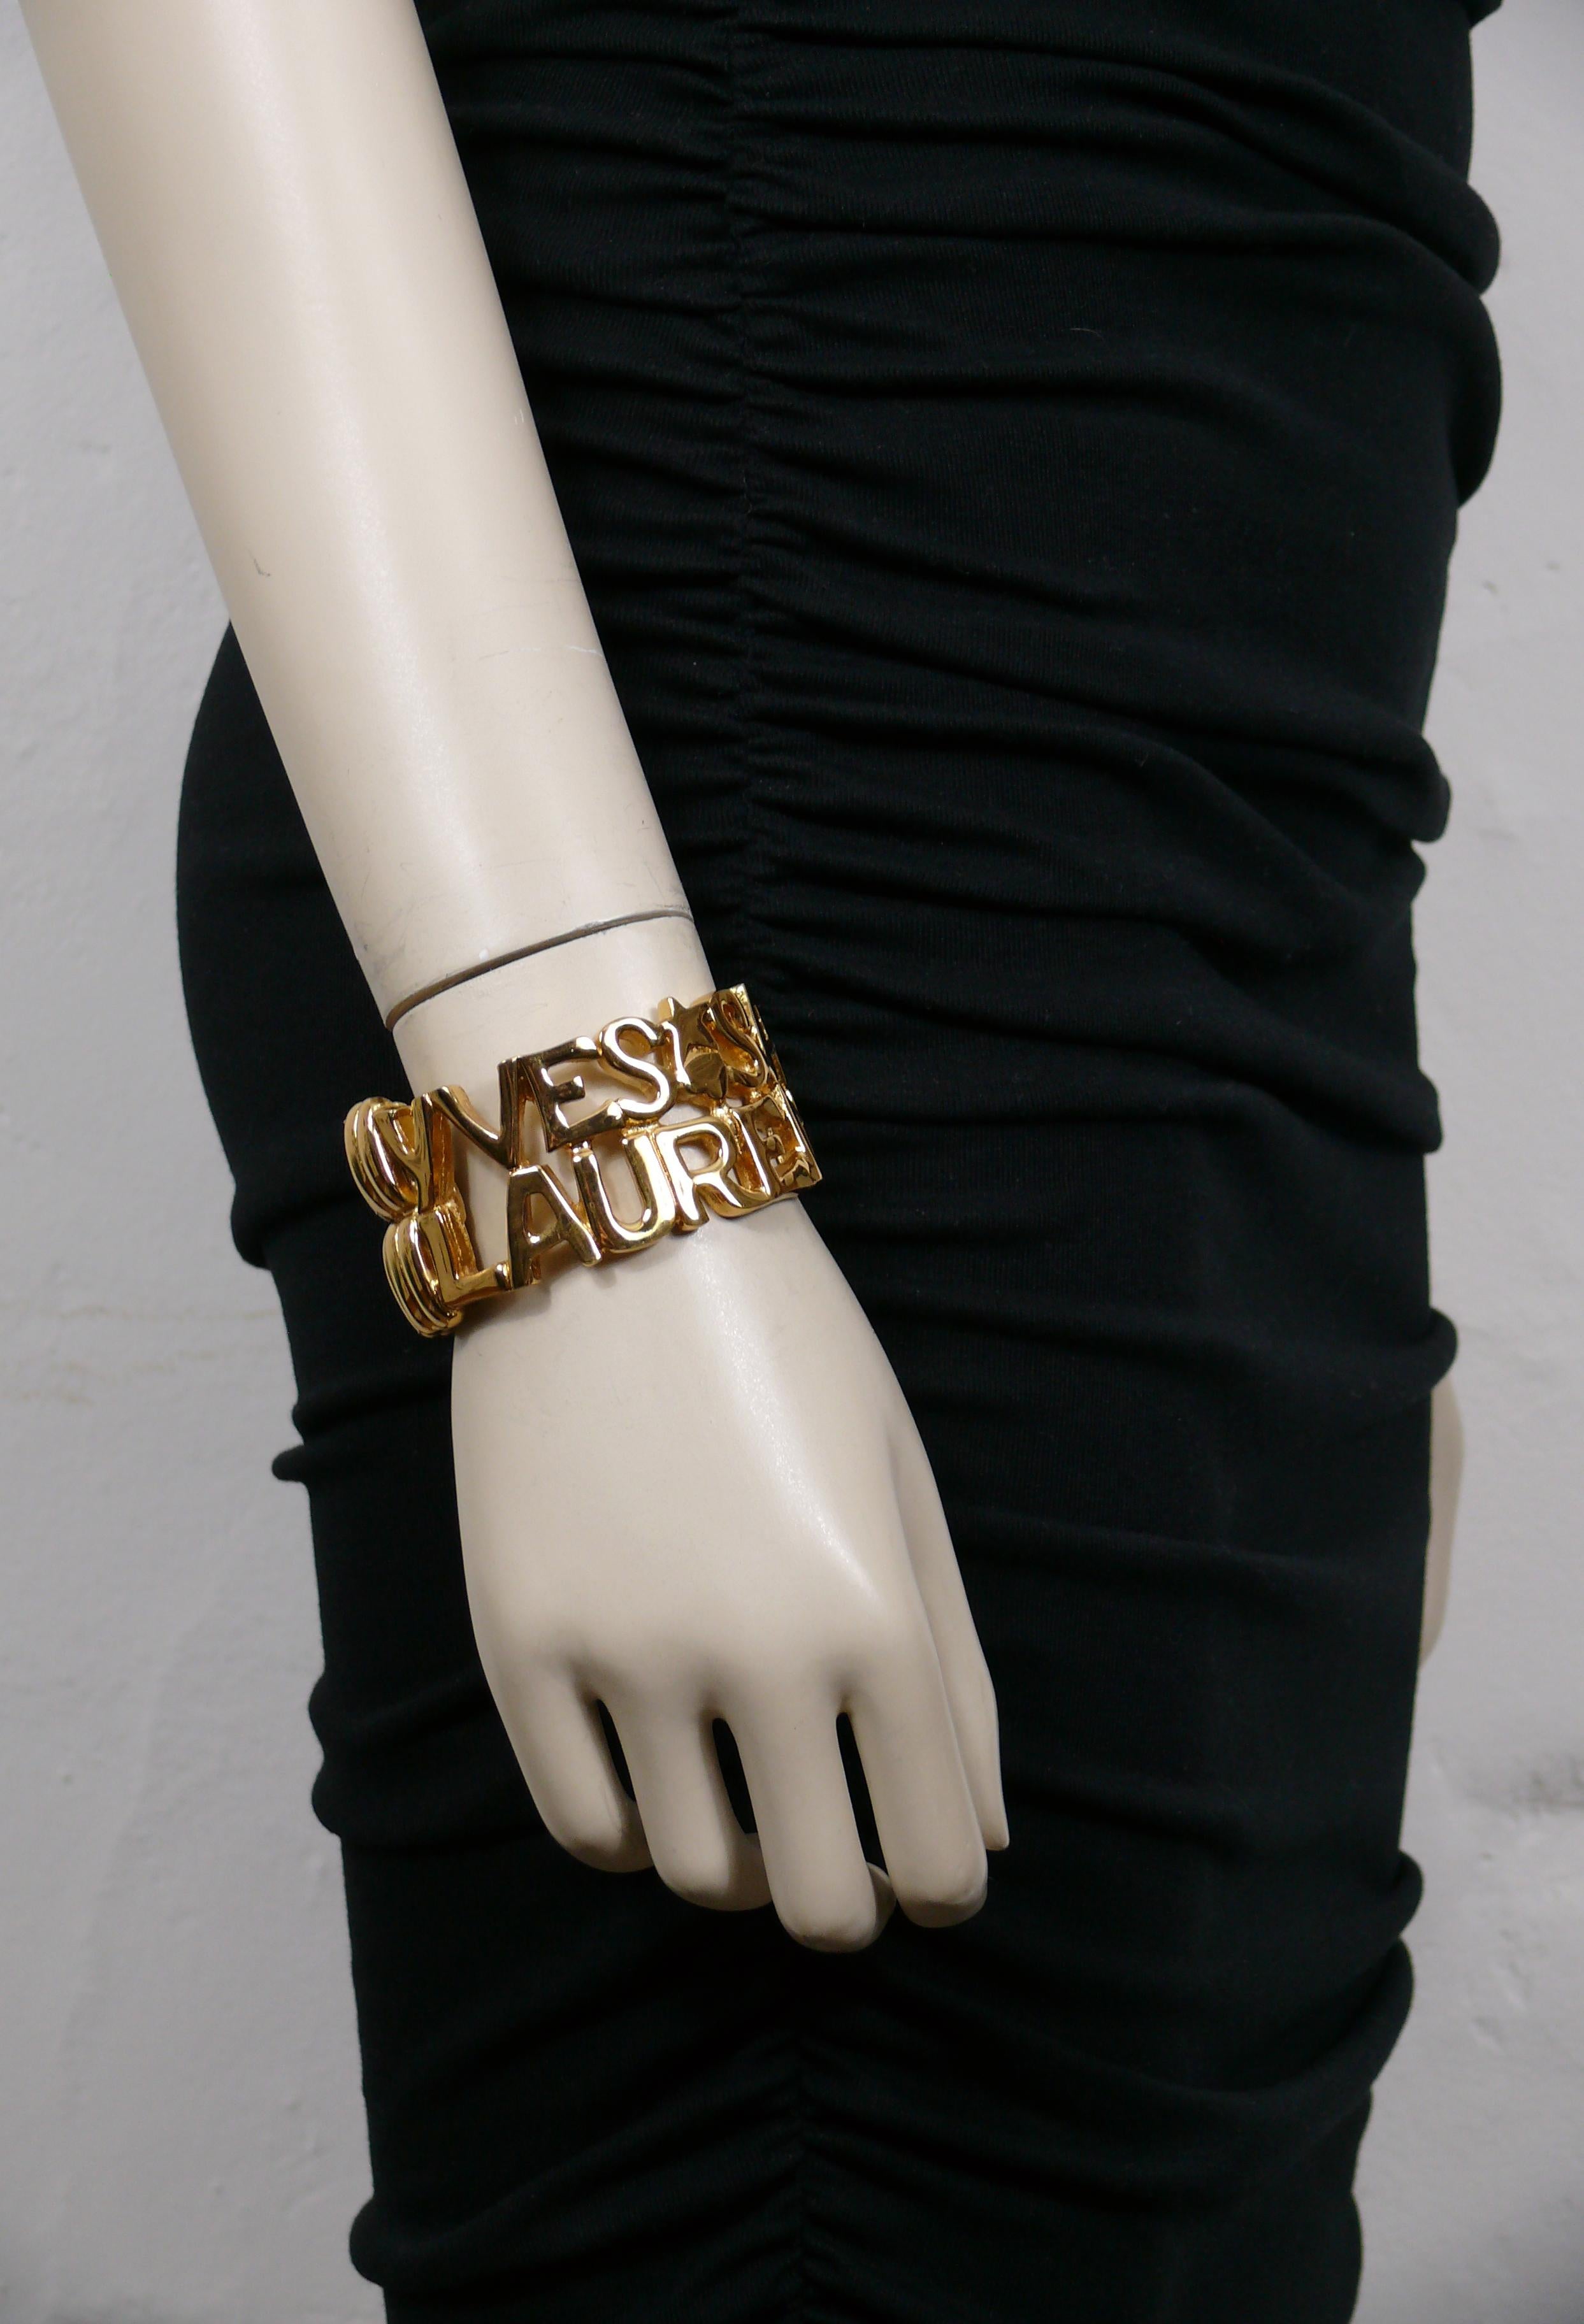 YVES SAINT LAURENT vintage gold tone cuff bracelet featuring spelled YVES SAINT LAURENT letters, hearts and stars.

Hinge spring closure.

Embossed YSL Made in France.

Indicative measurements : inner max. measurements approx. 5.7 cm x 4.6 cm (2.24